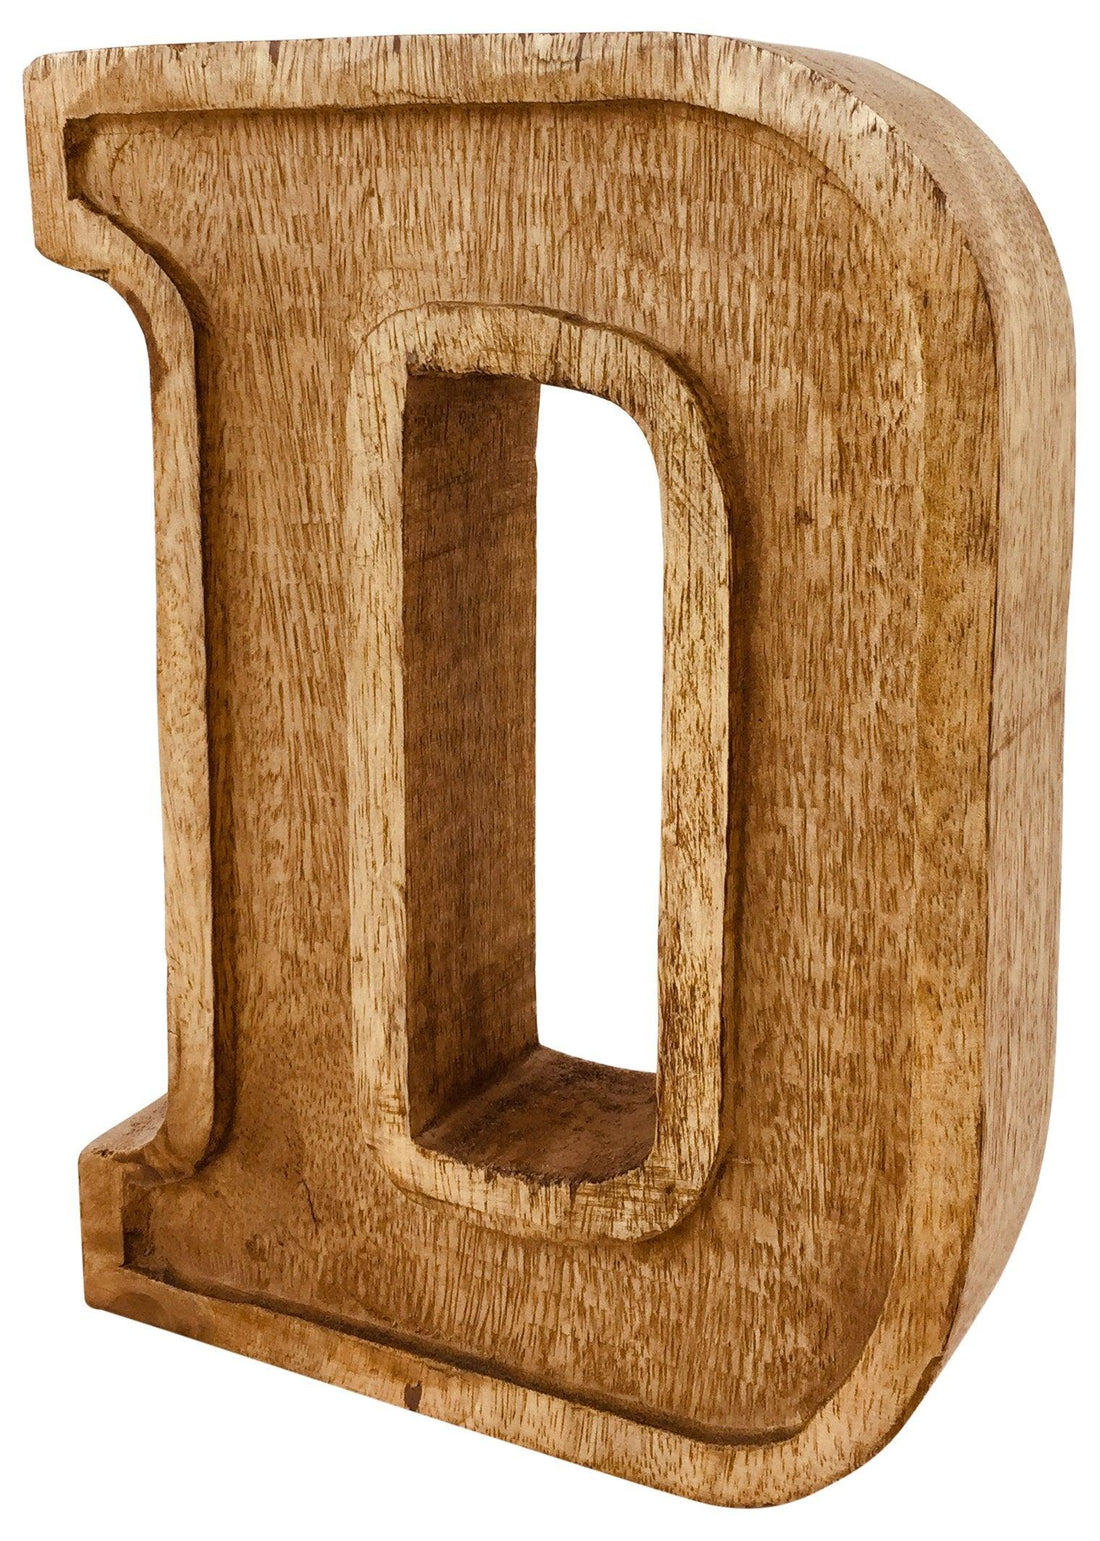 Hand Carved Wooden Embossed Letter D - £18.99 - Single Letters 